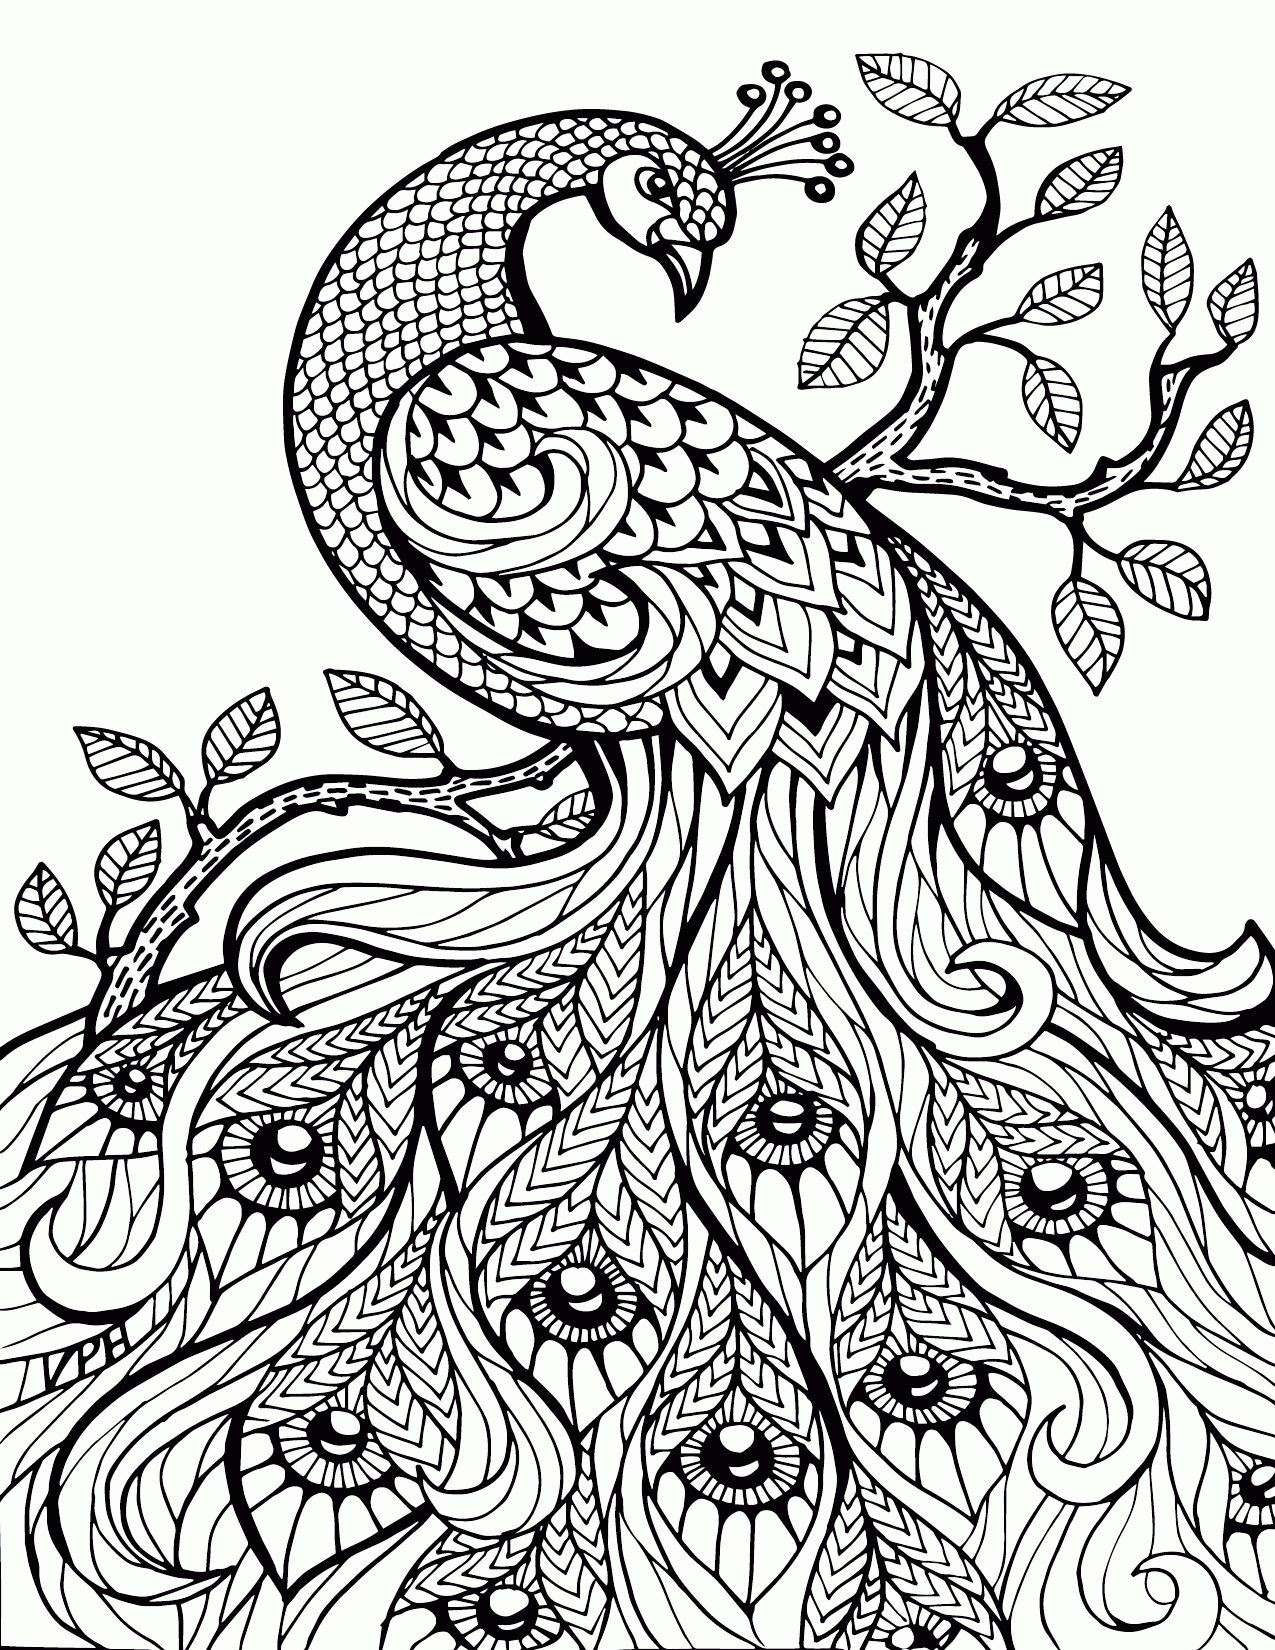 Adult Stress Relief Coloring Pages Printable   Coloring Pages For ...